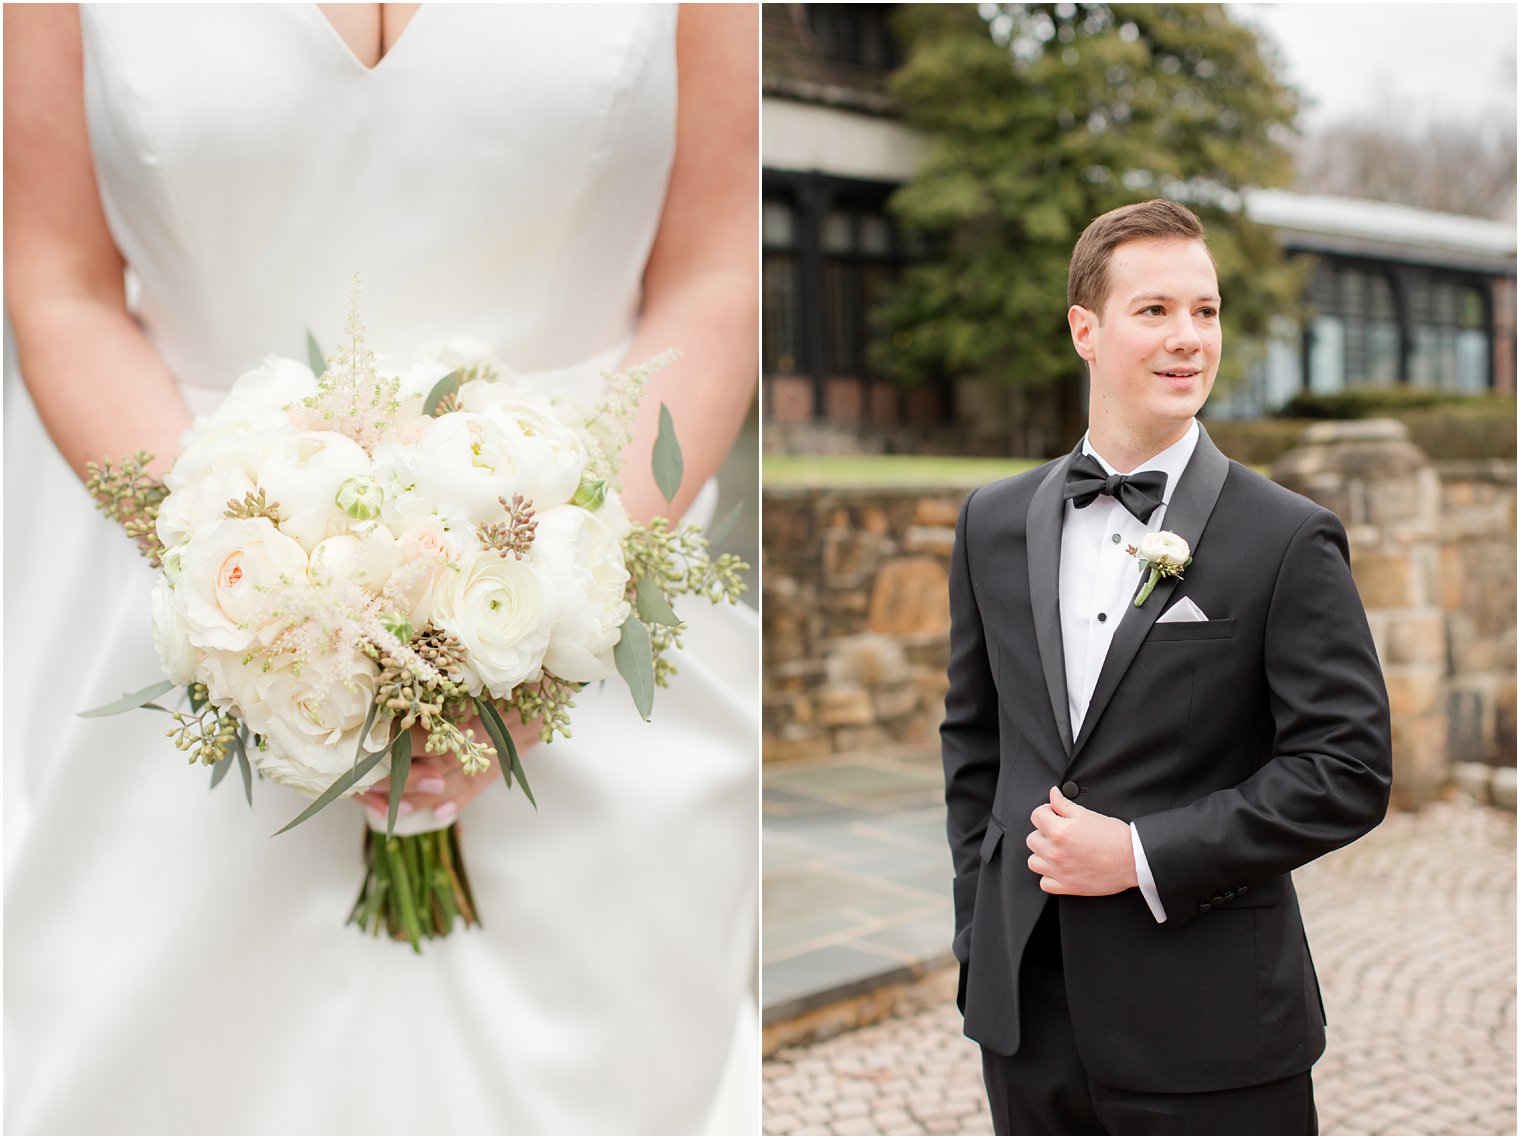 classic white florals for a winter wedding